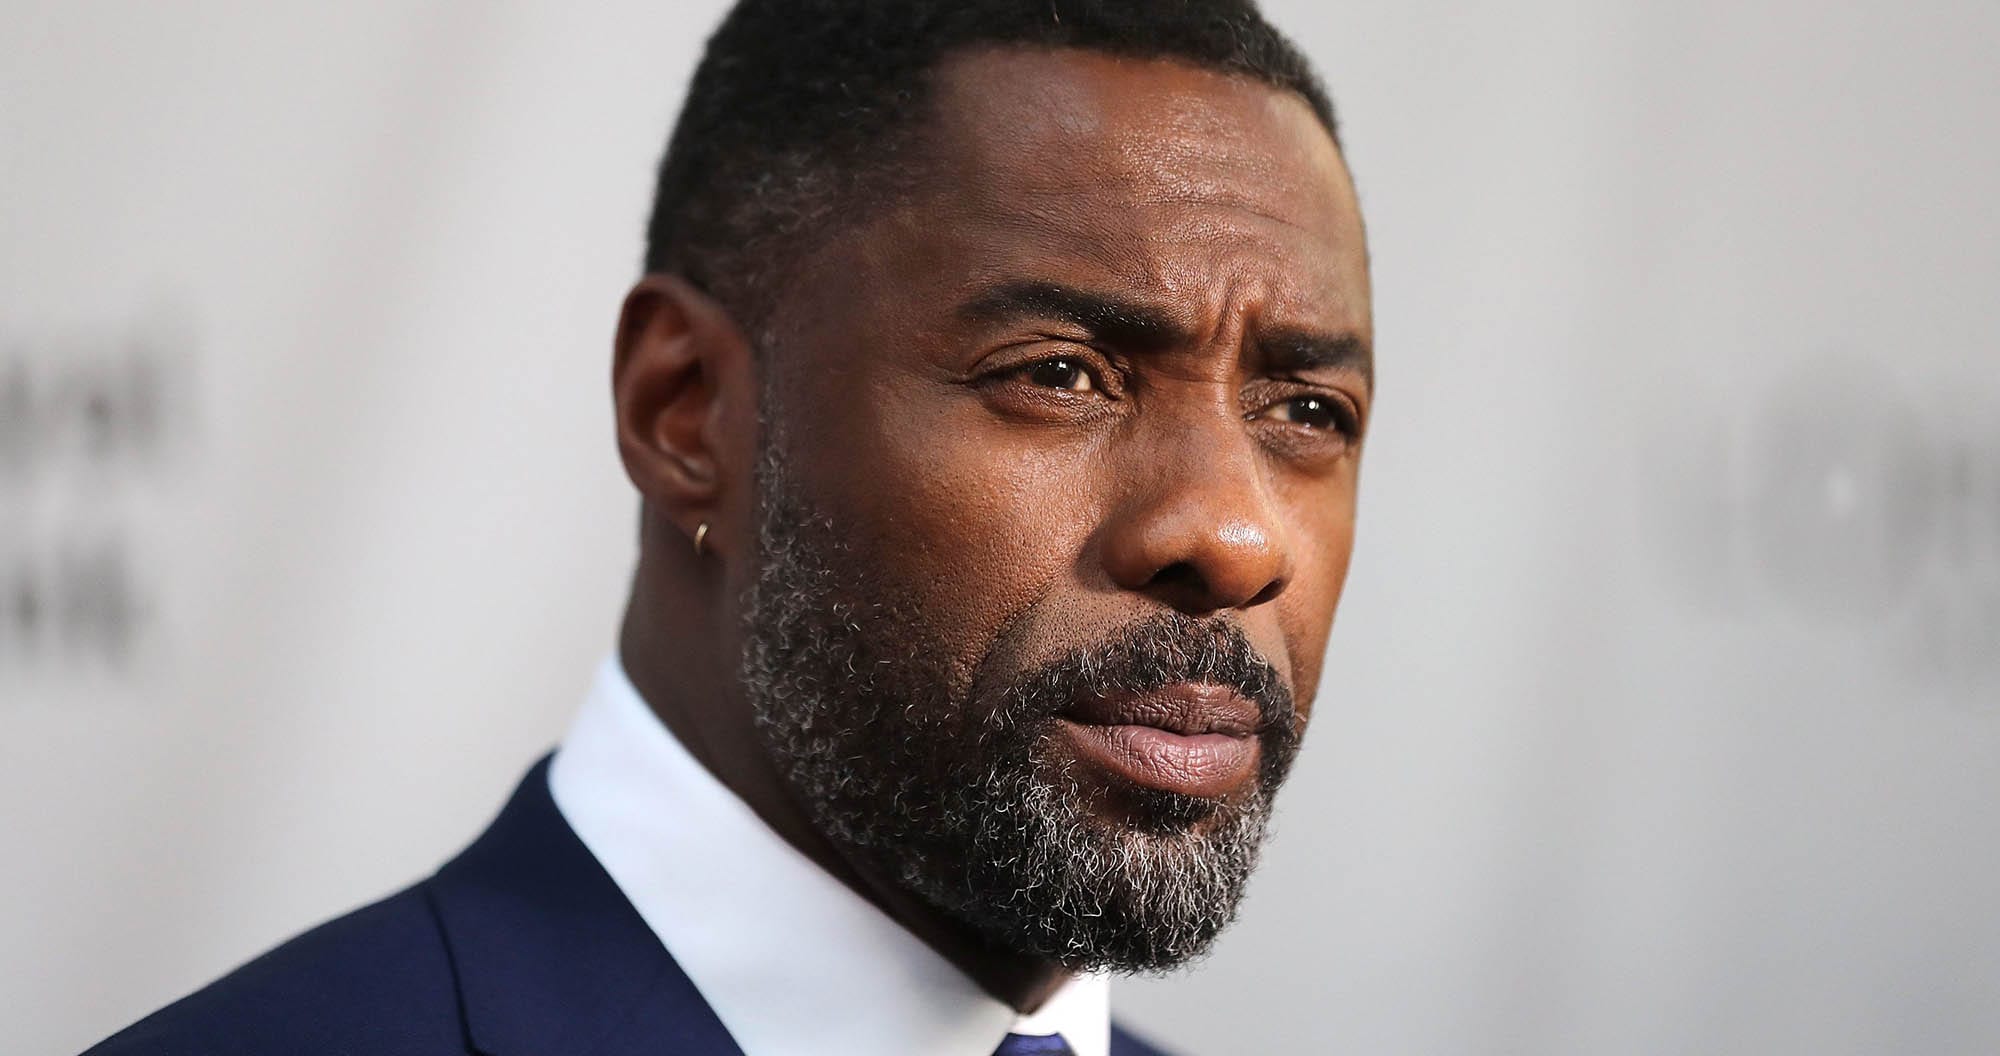 While we wait for him to wreck the dancefloor in the next season of 'Turn up Charlie', here’s a ranking of 19 of Idris Elba’s best roles ever.